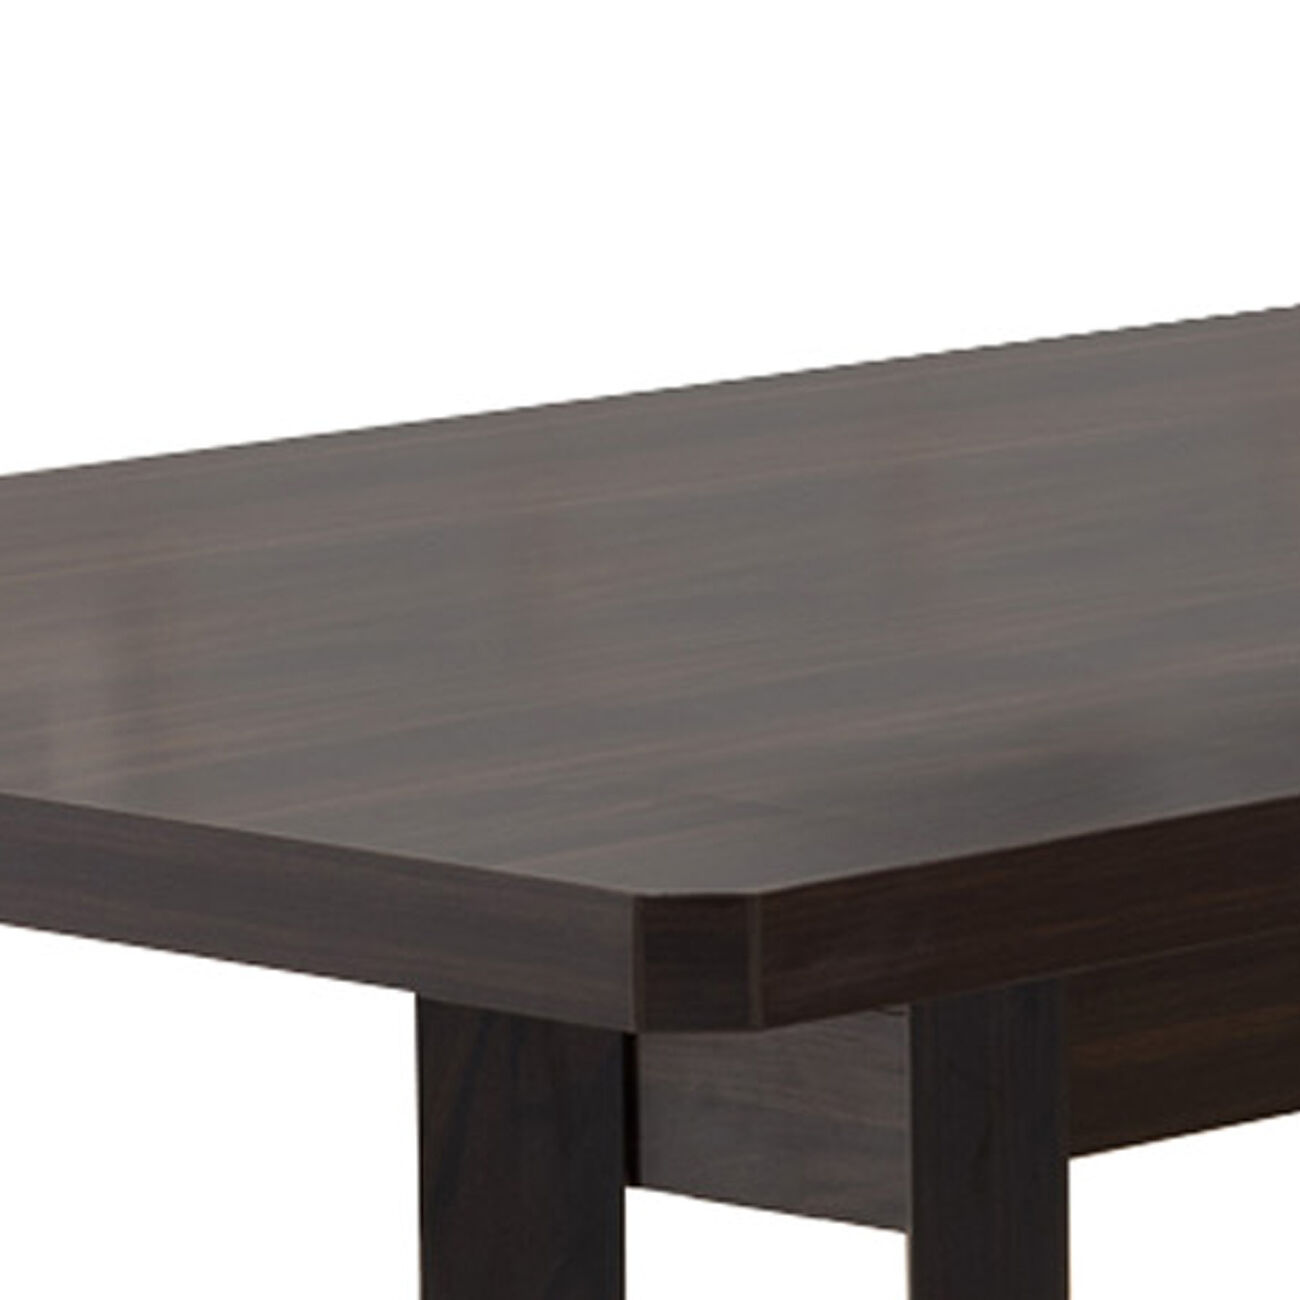 Rectangular Wooden Dining Table with Uniquely Carved Legs, Dark Brown